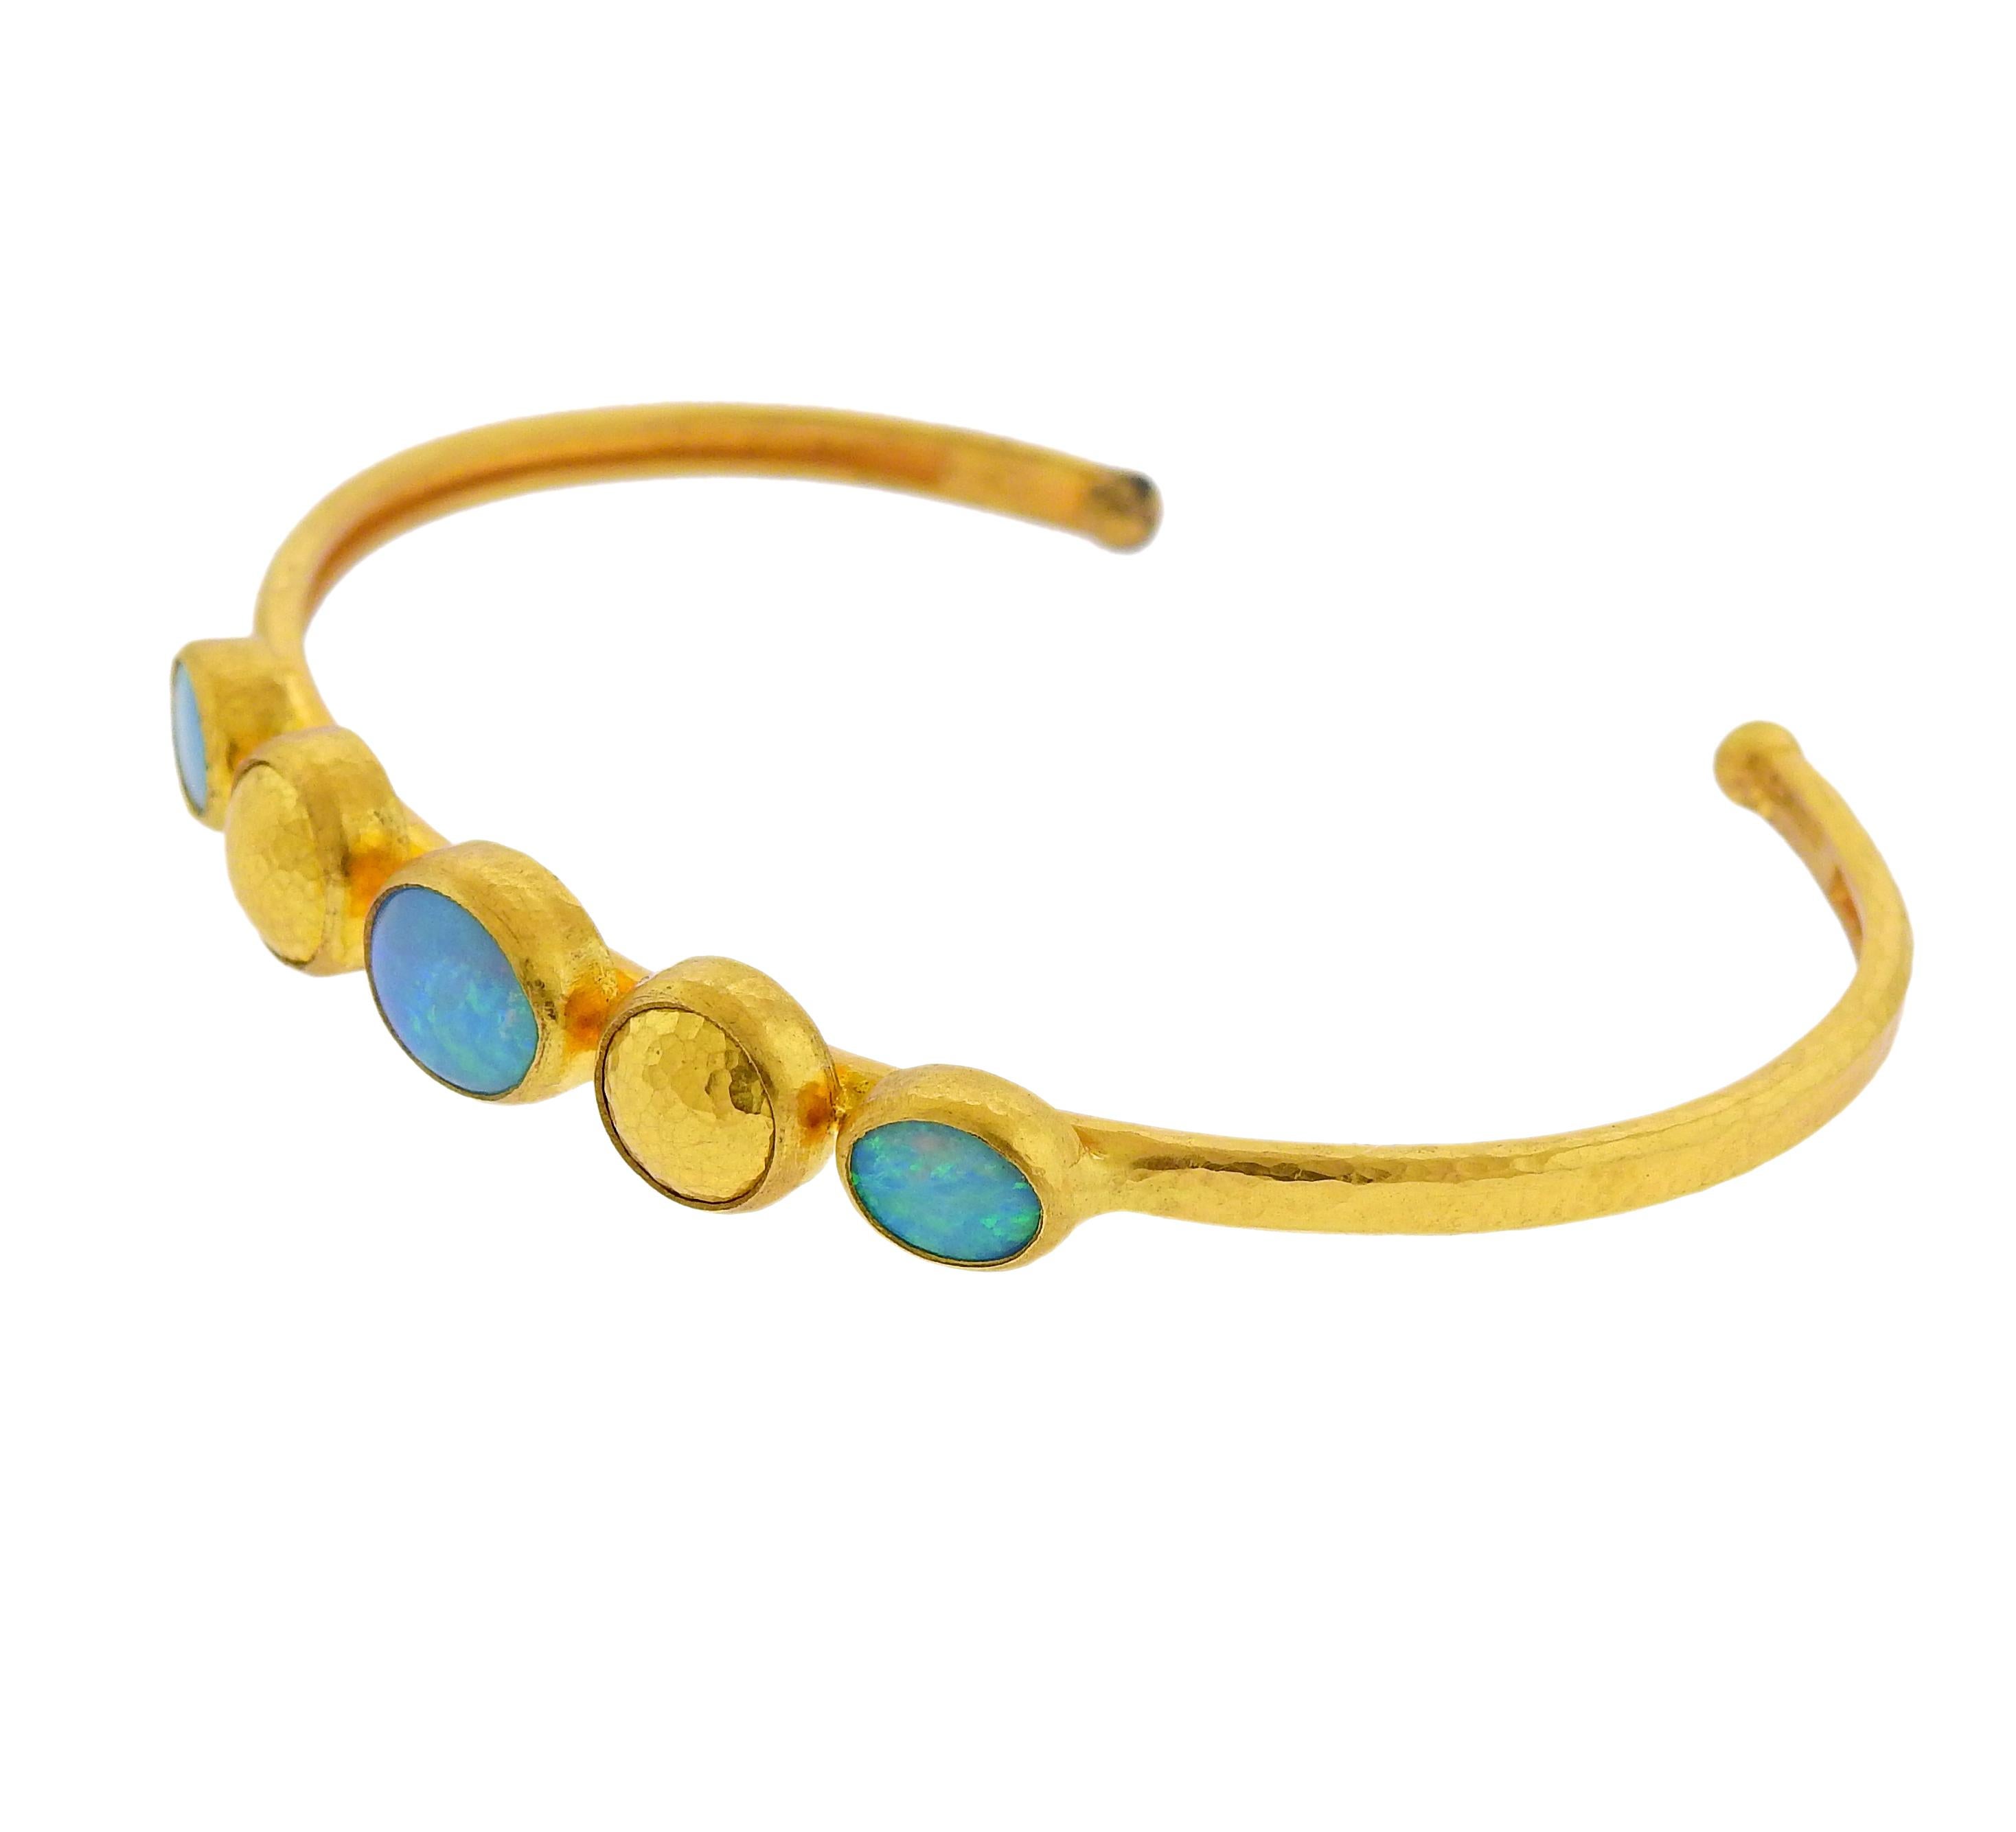 Brand new 22k and 24k gold cuff bracelet by Gurhan, set with opals. Retail $8700. Bracelet will fit approx. 7-7.5